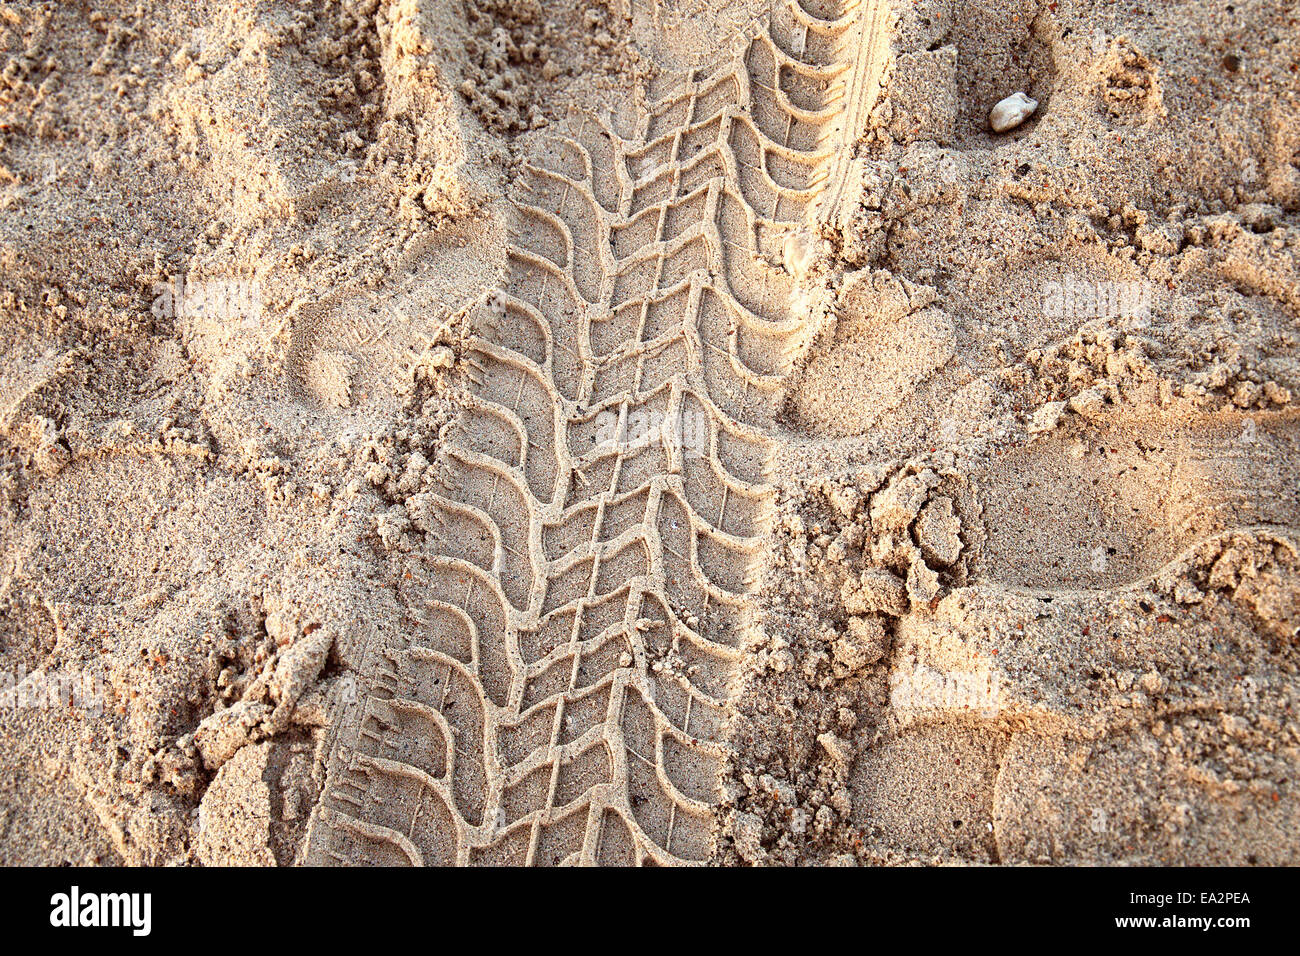 Tire ruts imprinted in the sand. Stock Photo